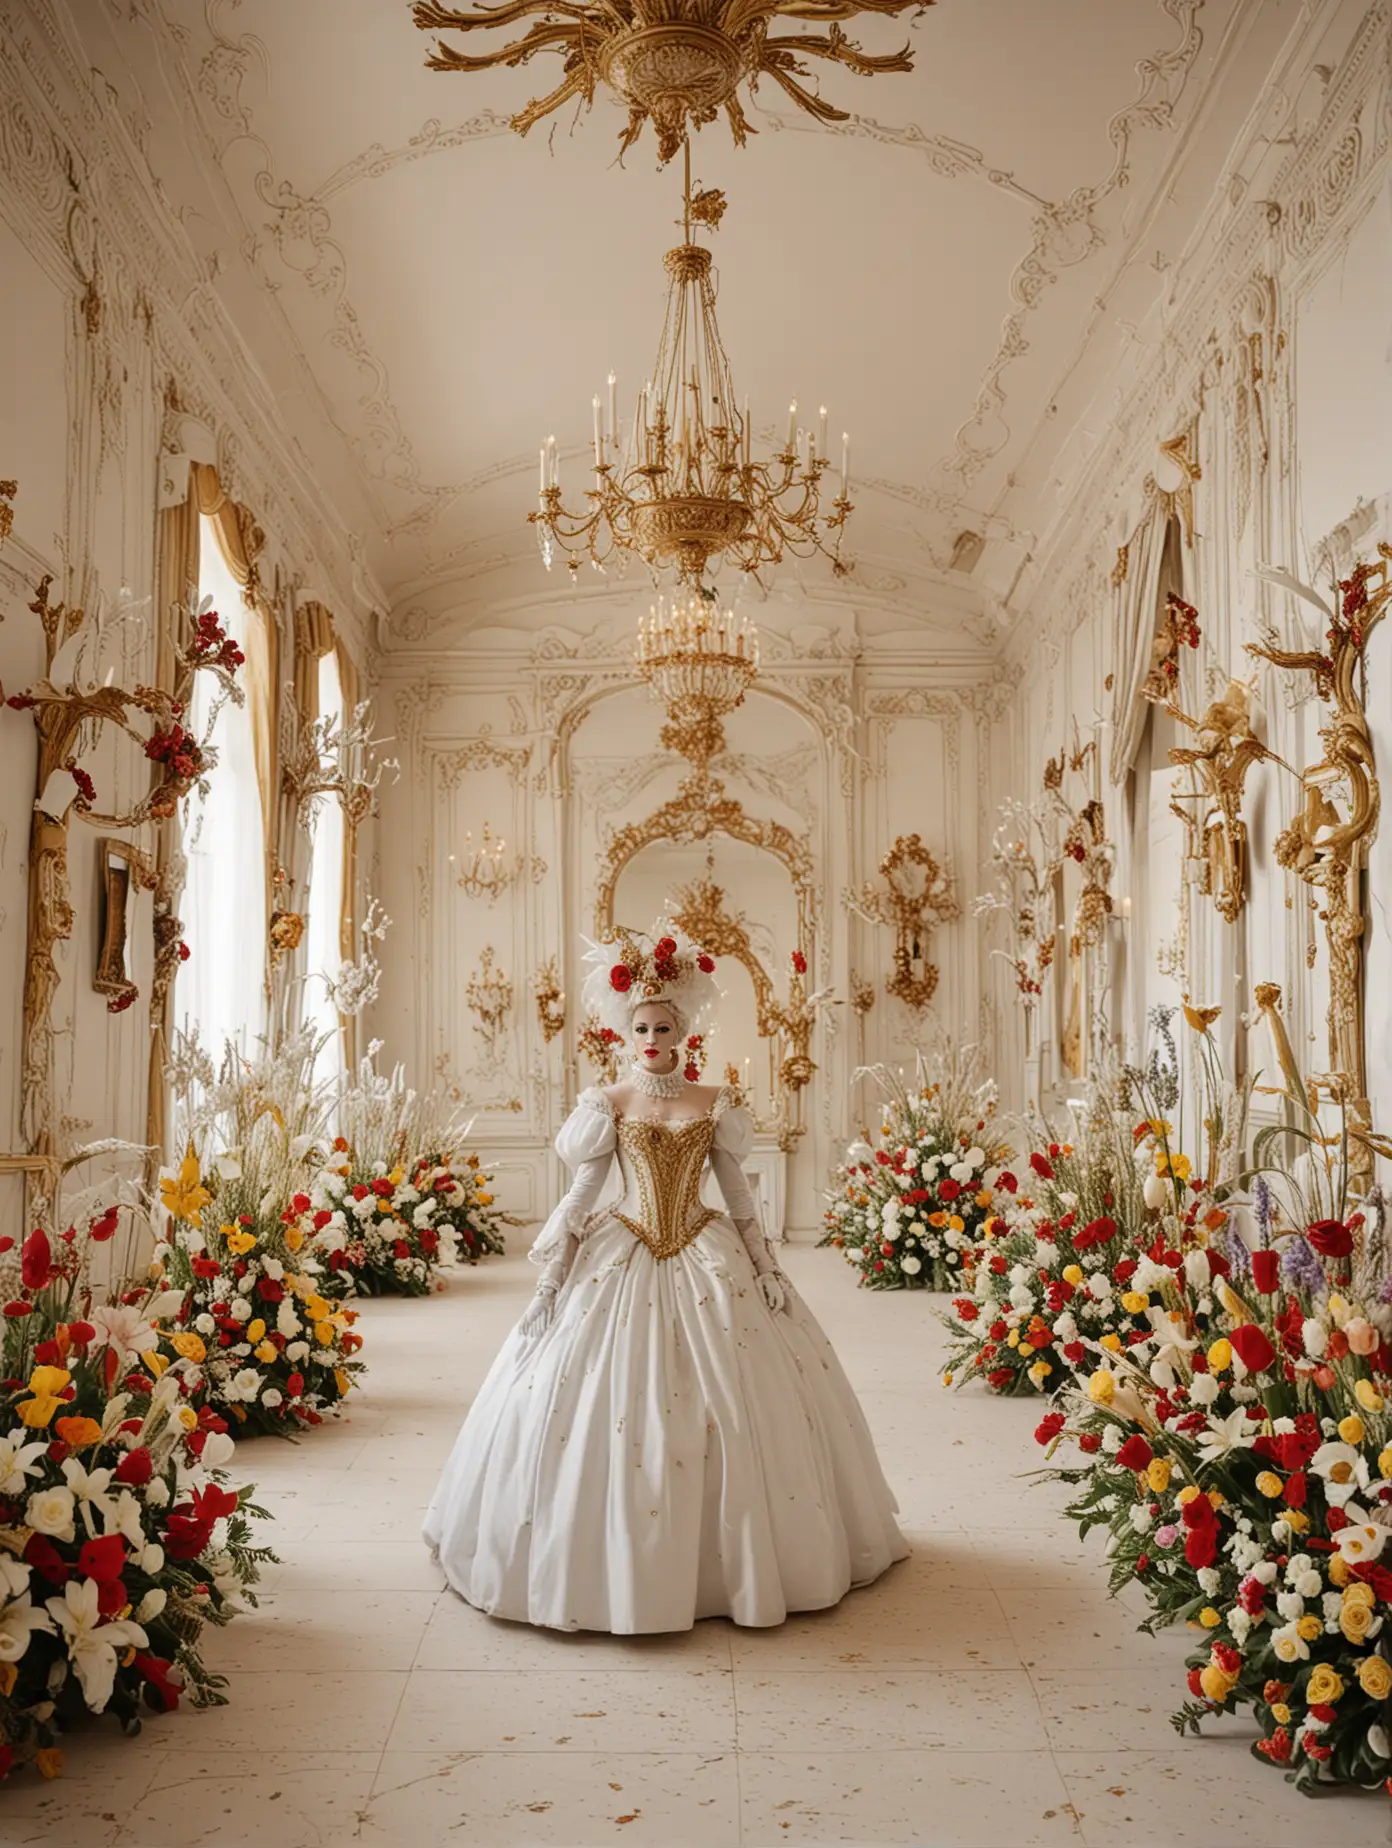 Golden-Carnival-Masquerade-in-a-White-Ballroom-with-Flowers